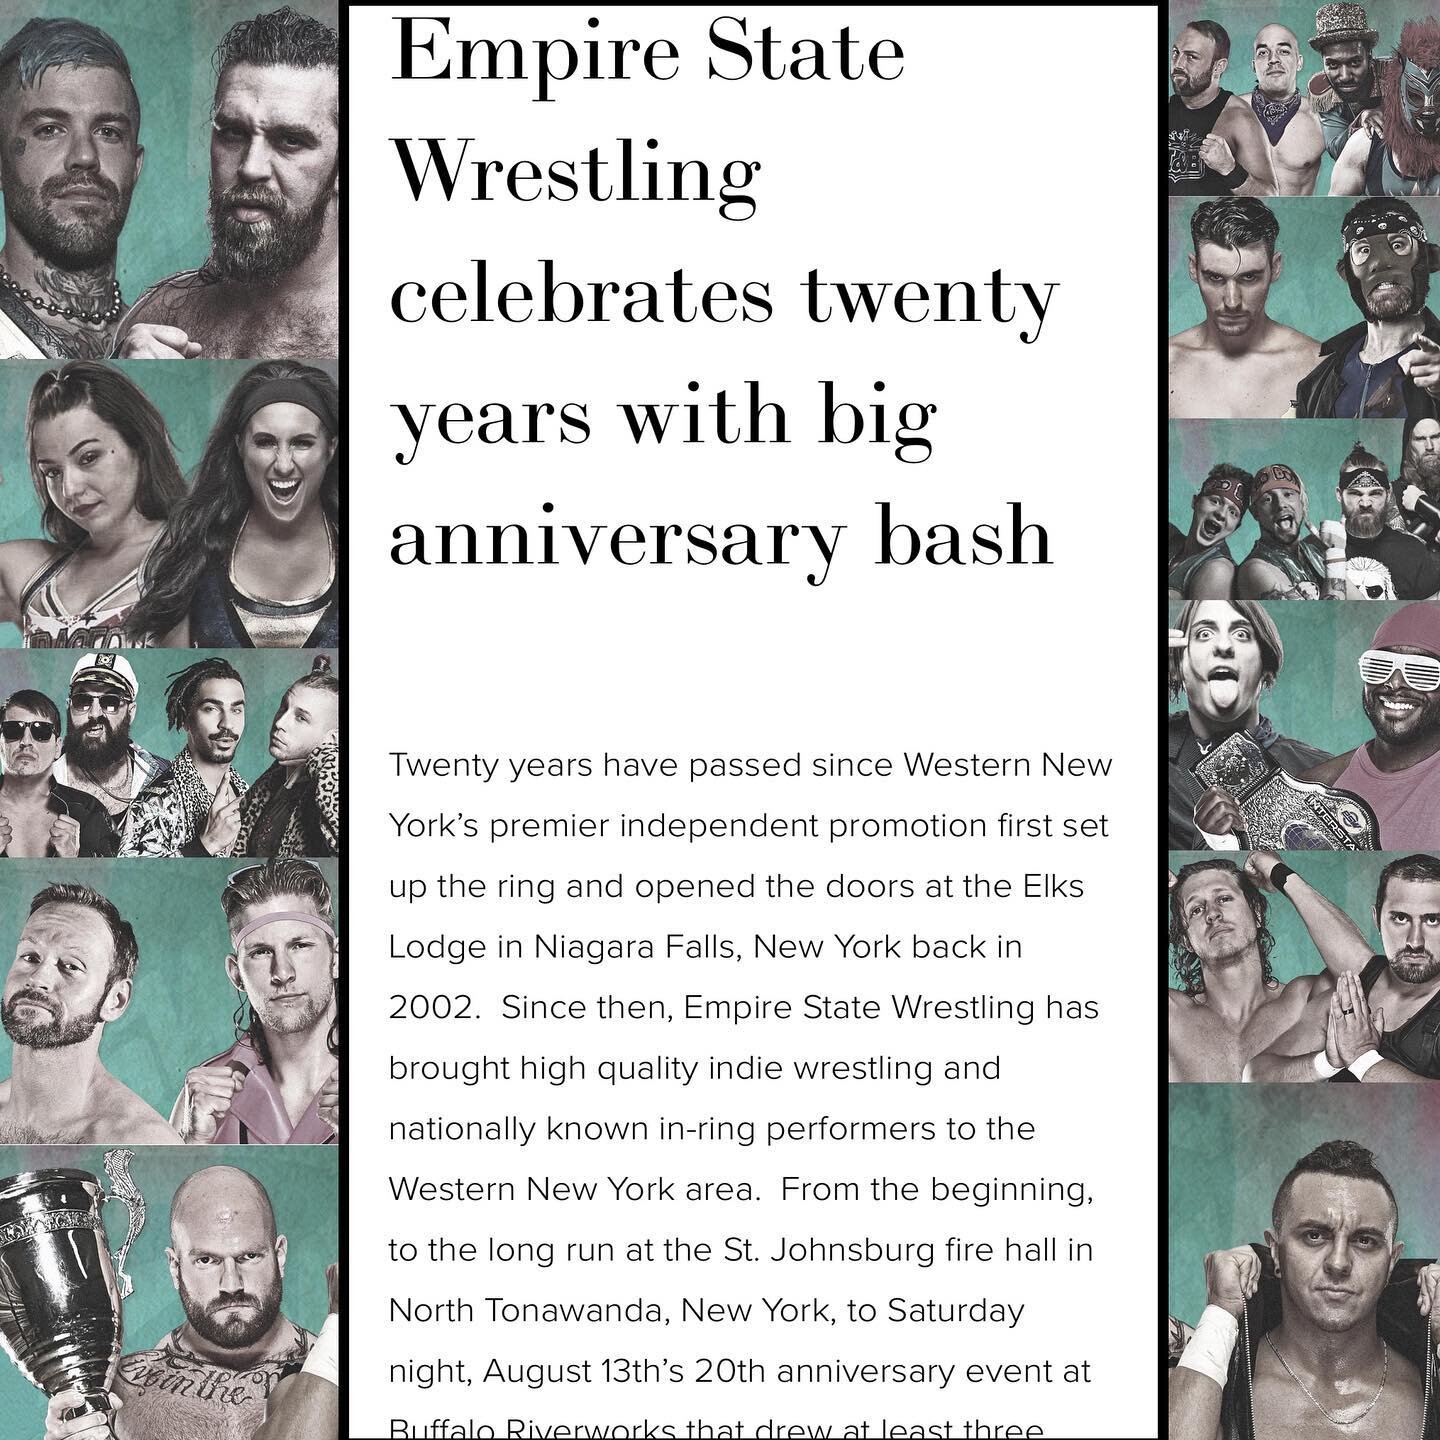 New on wrestlemap.com!  WrestleMap was on hand for the @eswwrestling 20th Anniversary show this past weekend! We have a full report with exclusive photos and videos now online at wrestlemap.com!

  _____________________________ 

#wrestling #prowrest